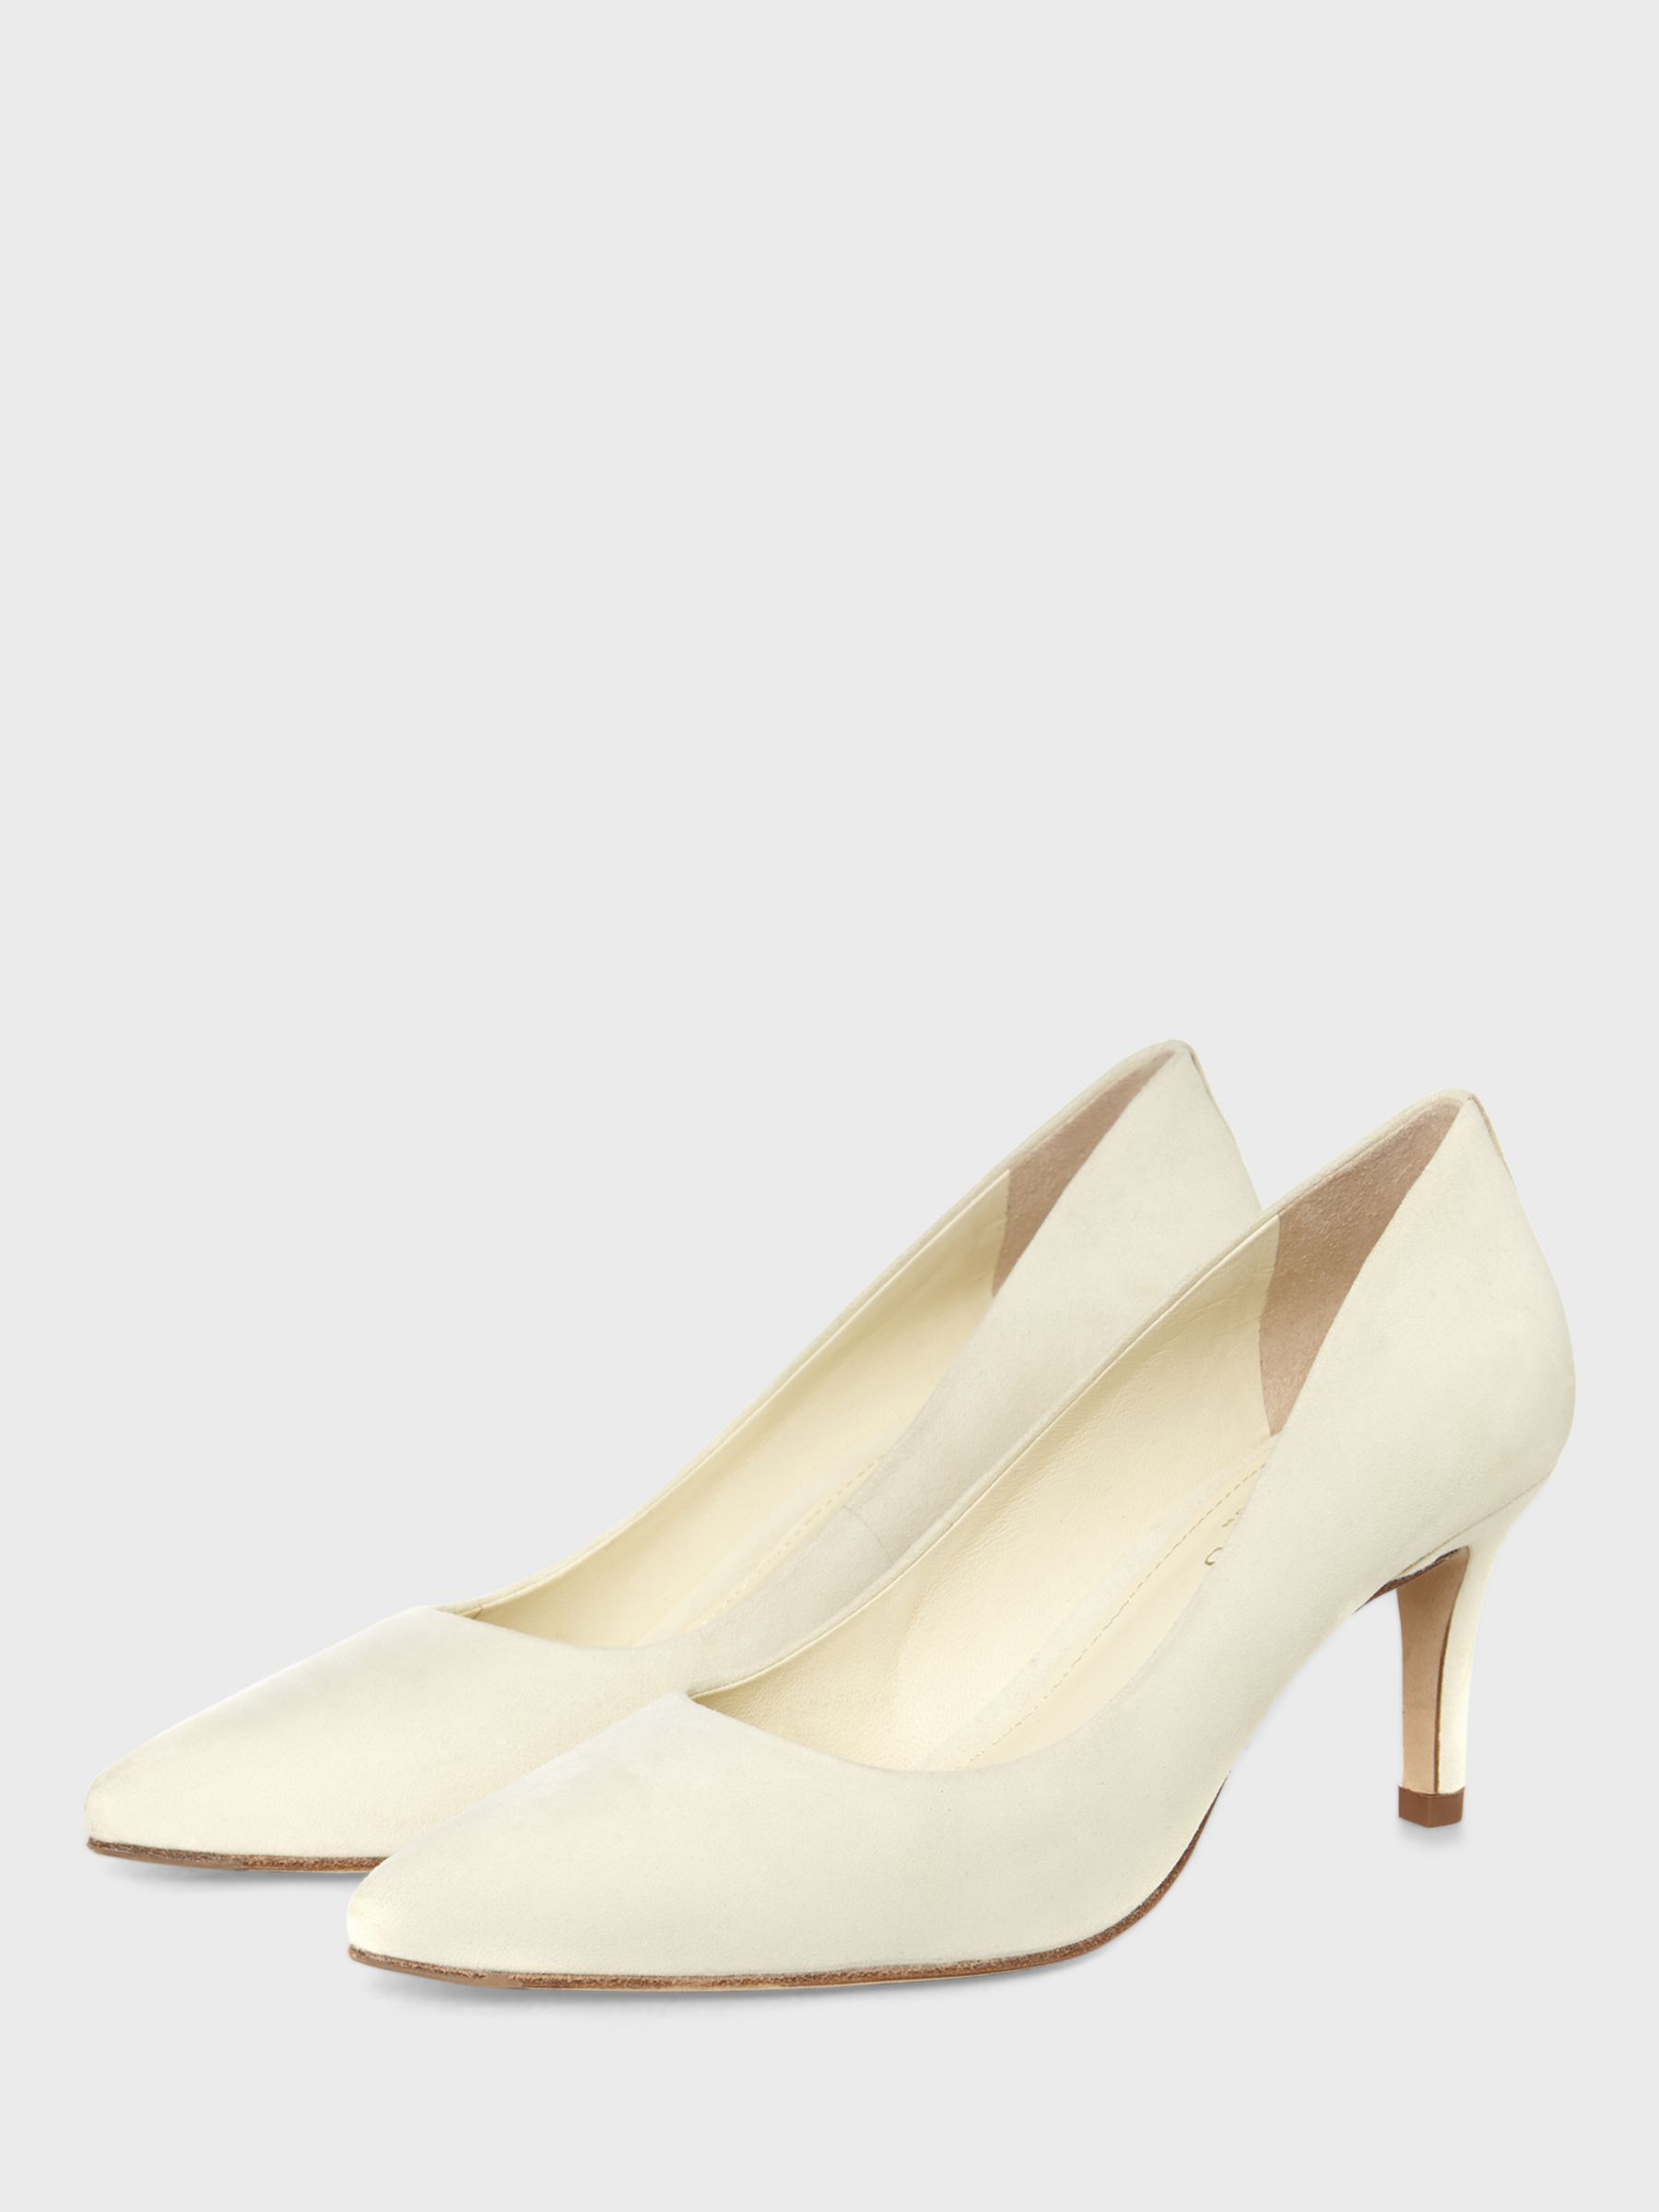 Hobbs Adrienne Suede Court Shoes, Pale Yellow at John Lewis & Partners